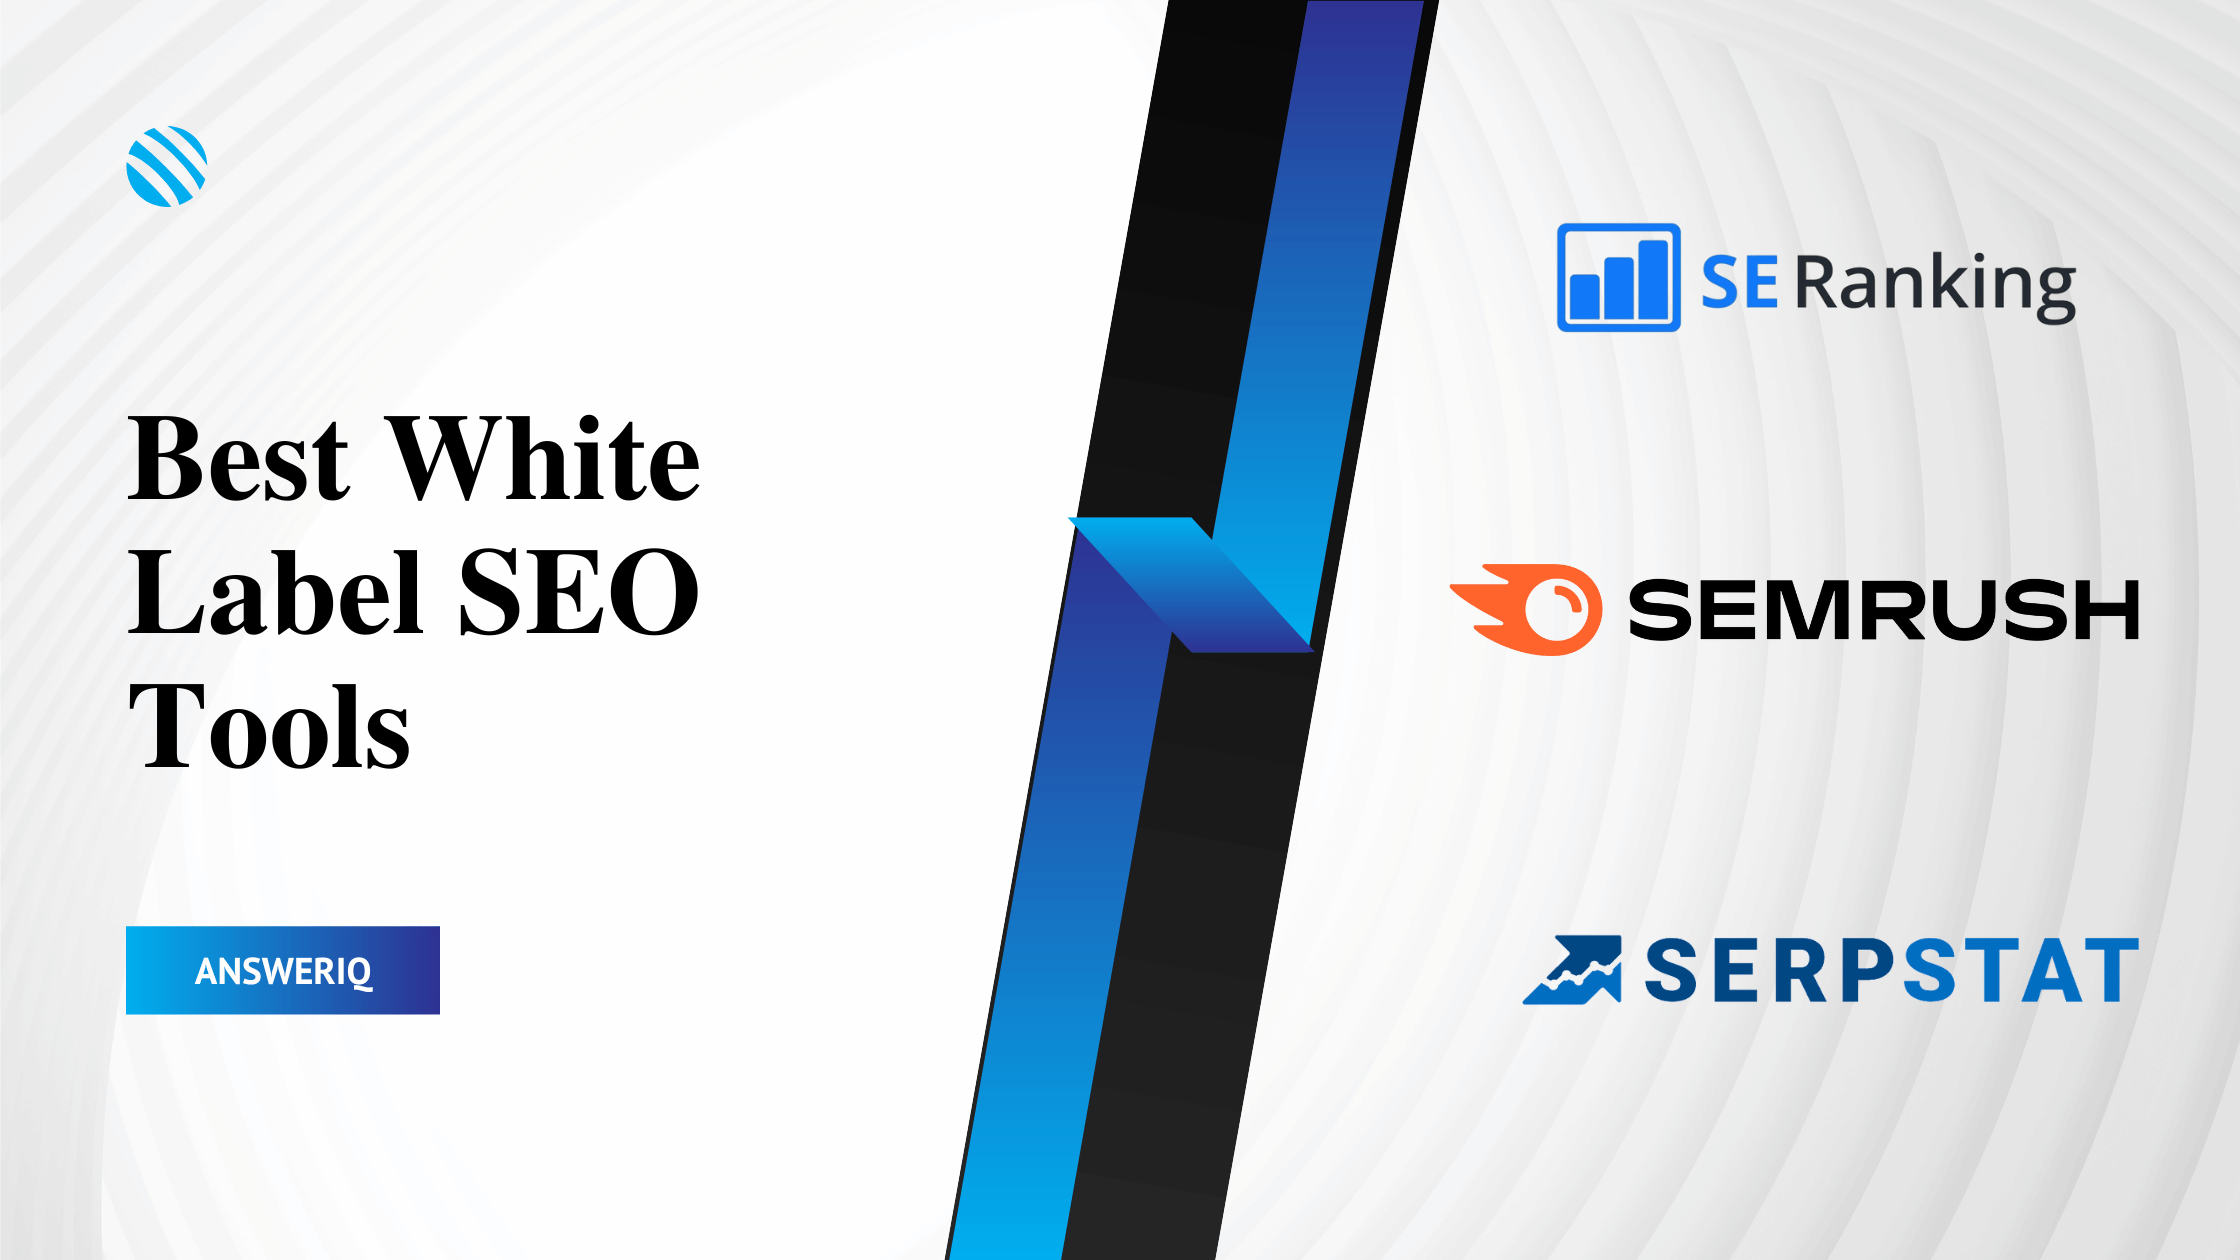 Benefits of Using White Label SEO Tools